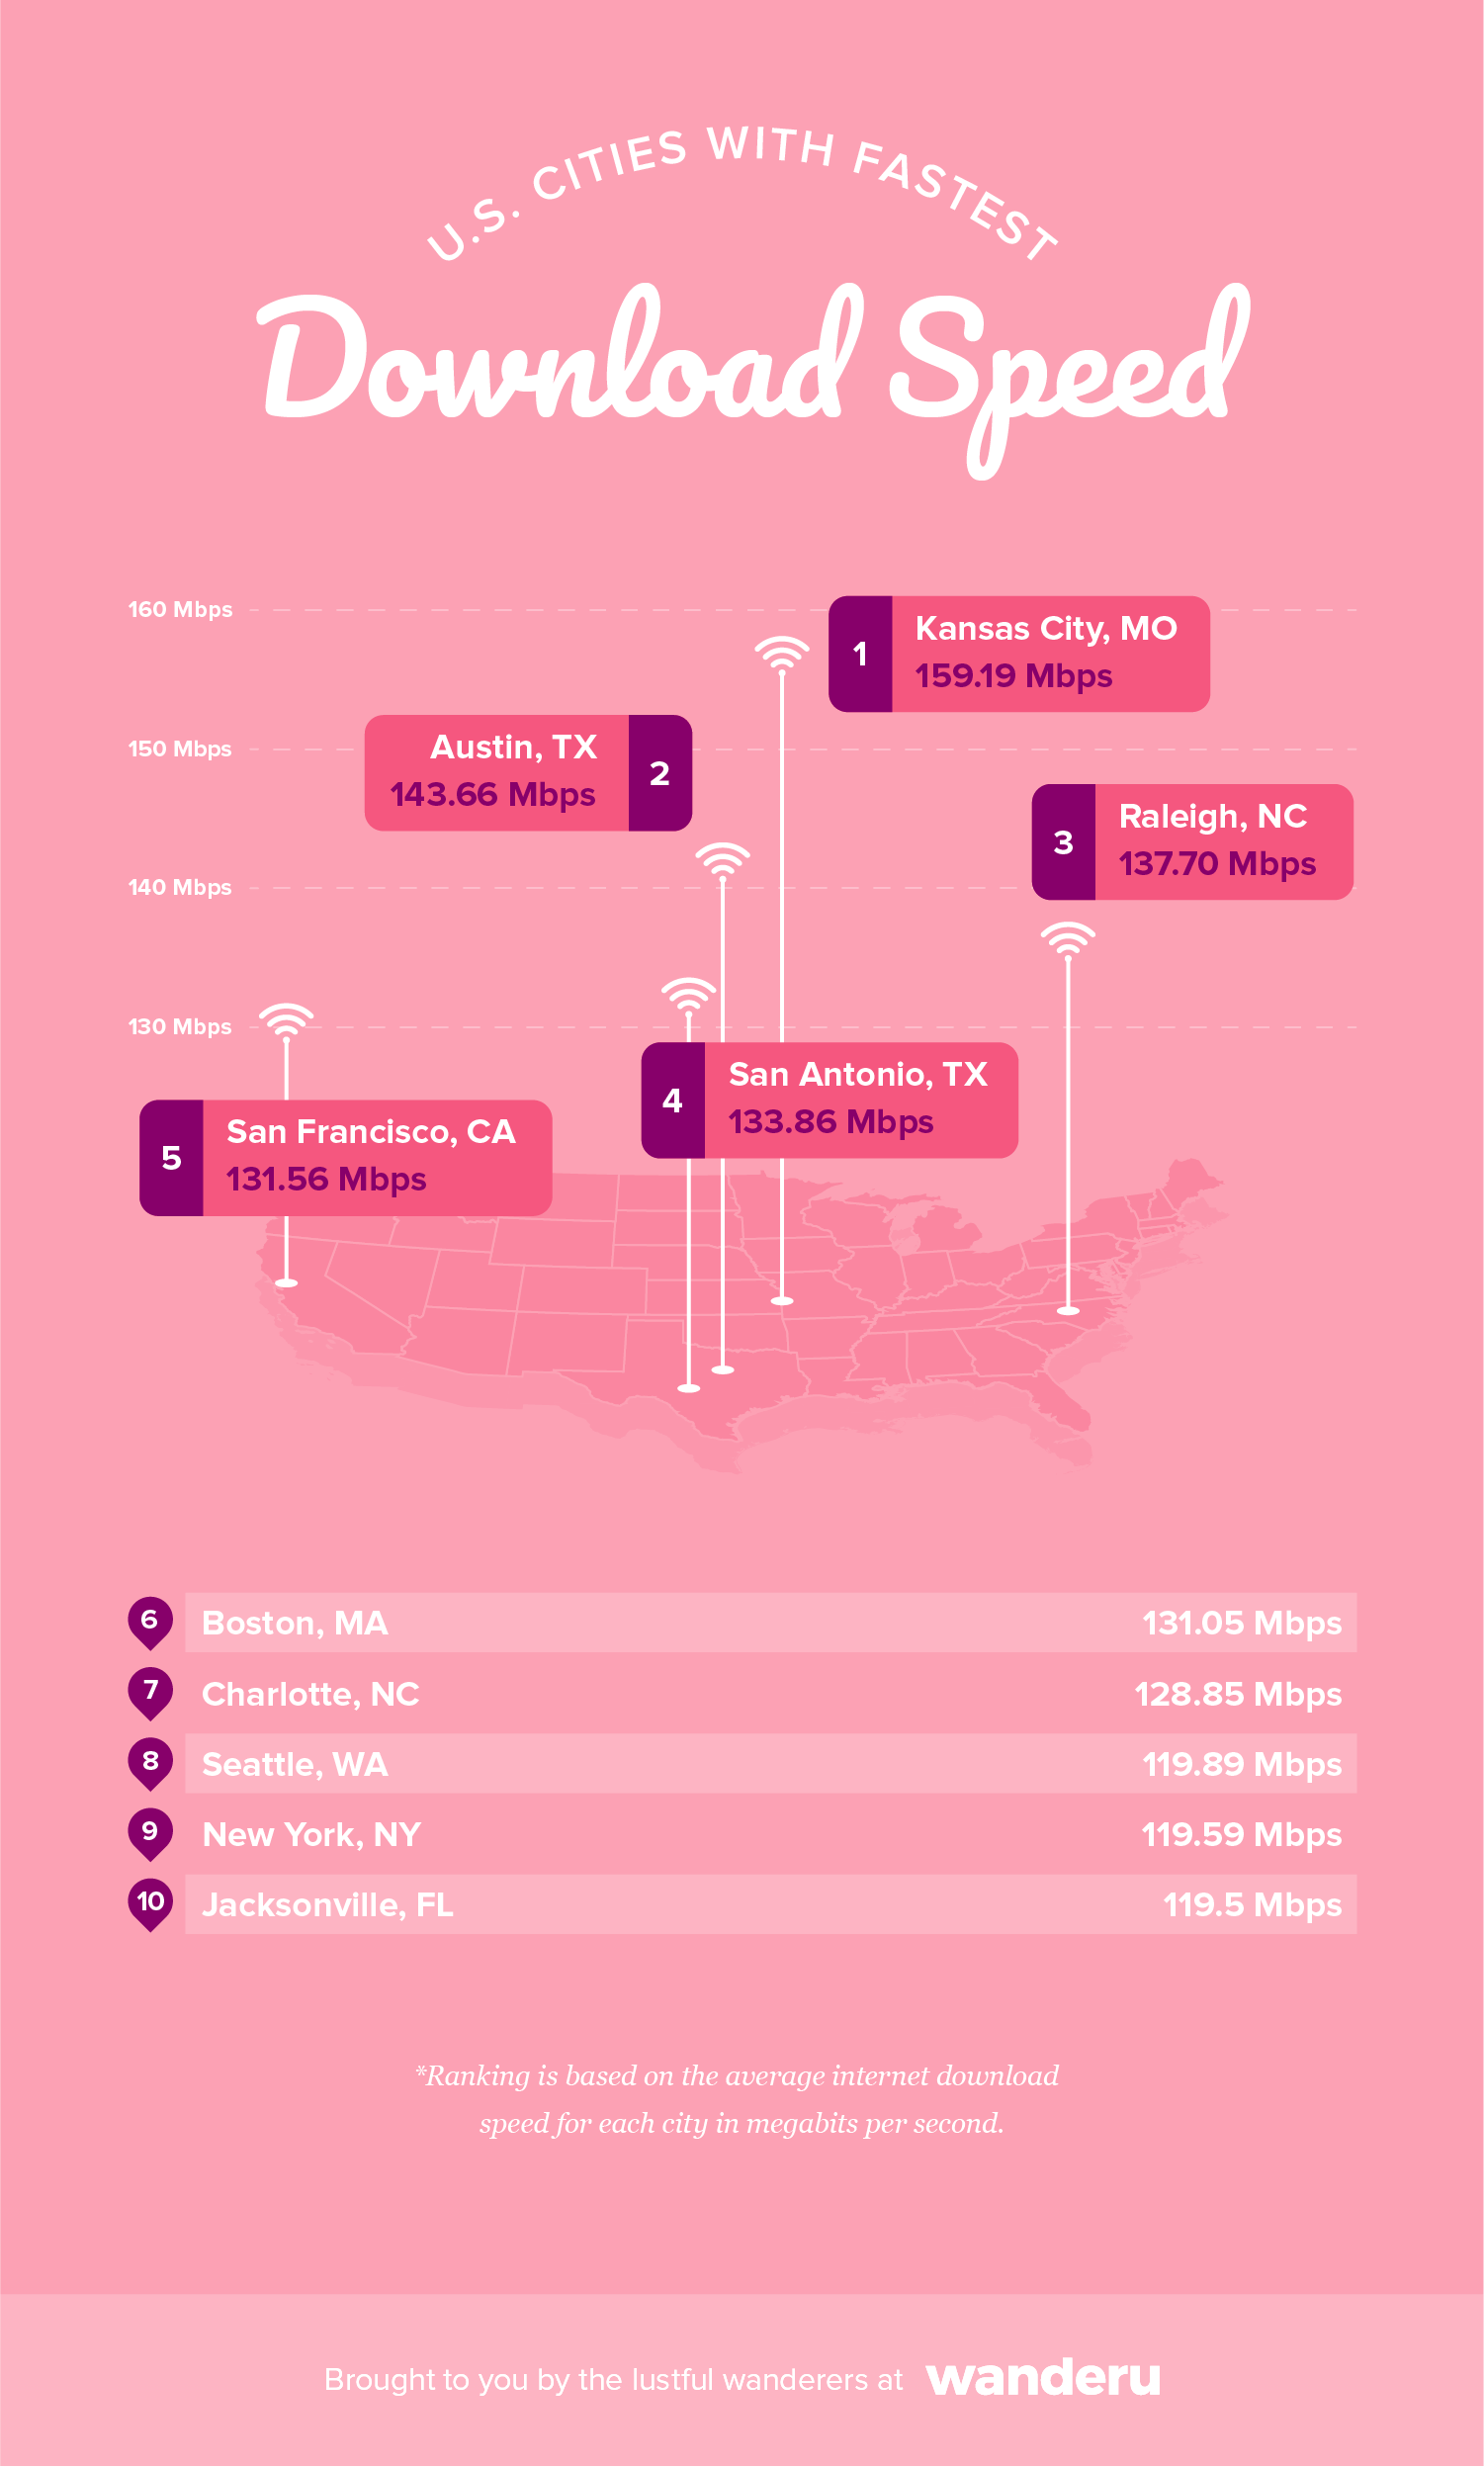 Graphic lists the top 10 U.S. cities with the fastest average download speed in Mbps.